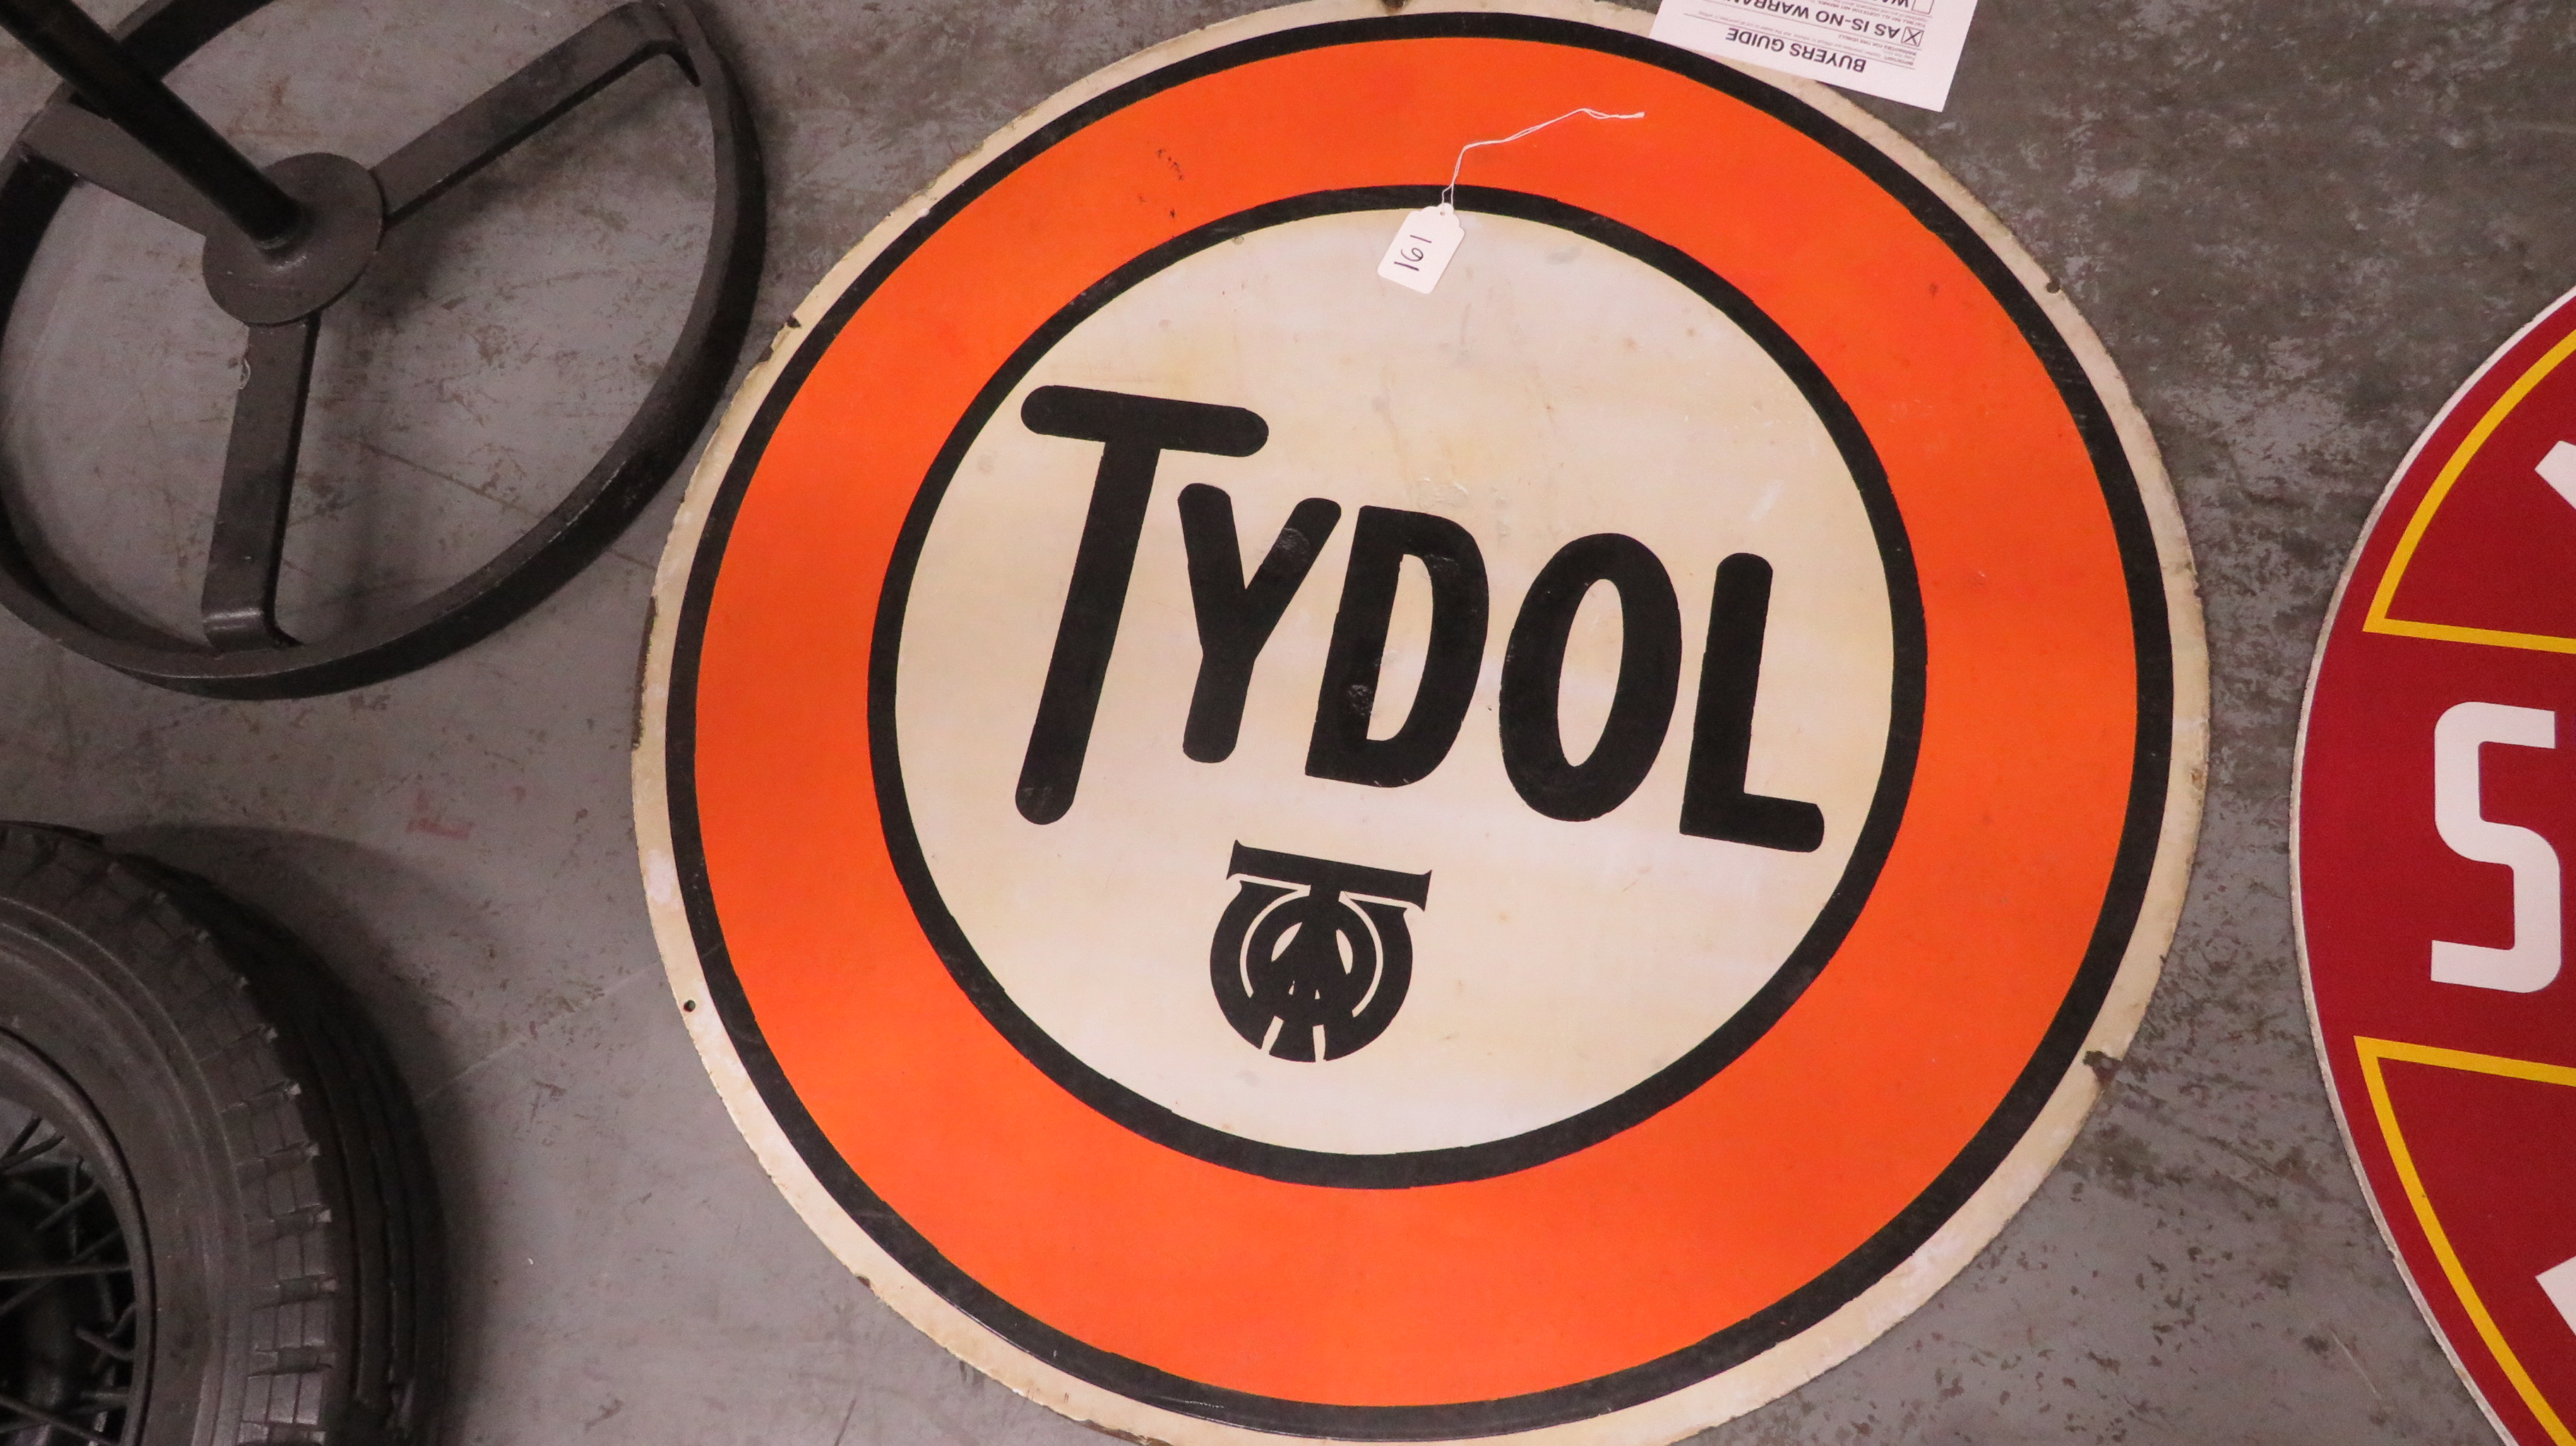 0th Image of a N/A TYDOL SIGN ORANGE AND WHITE